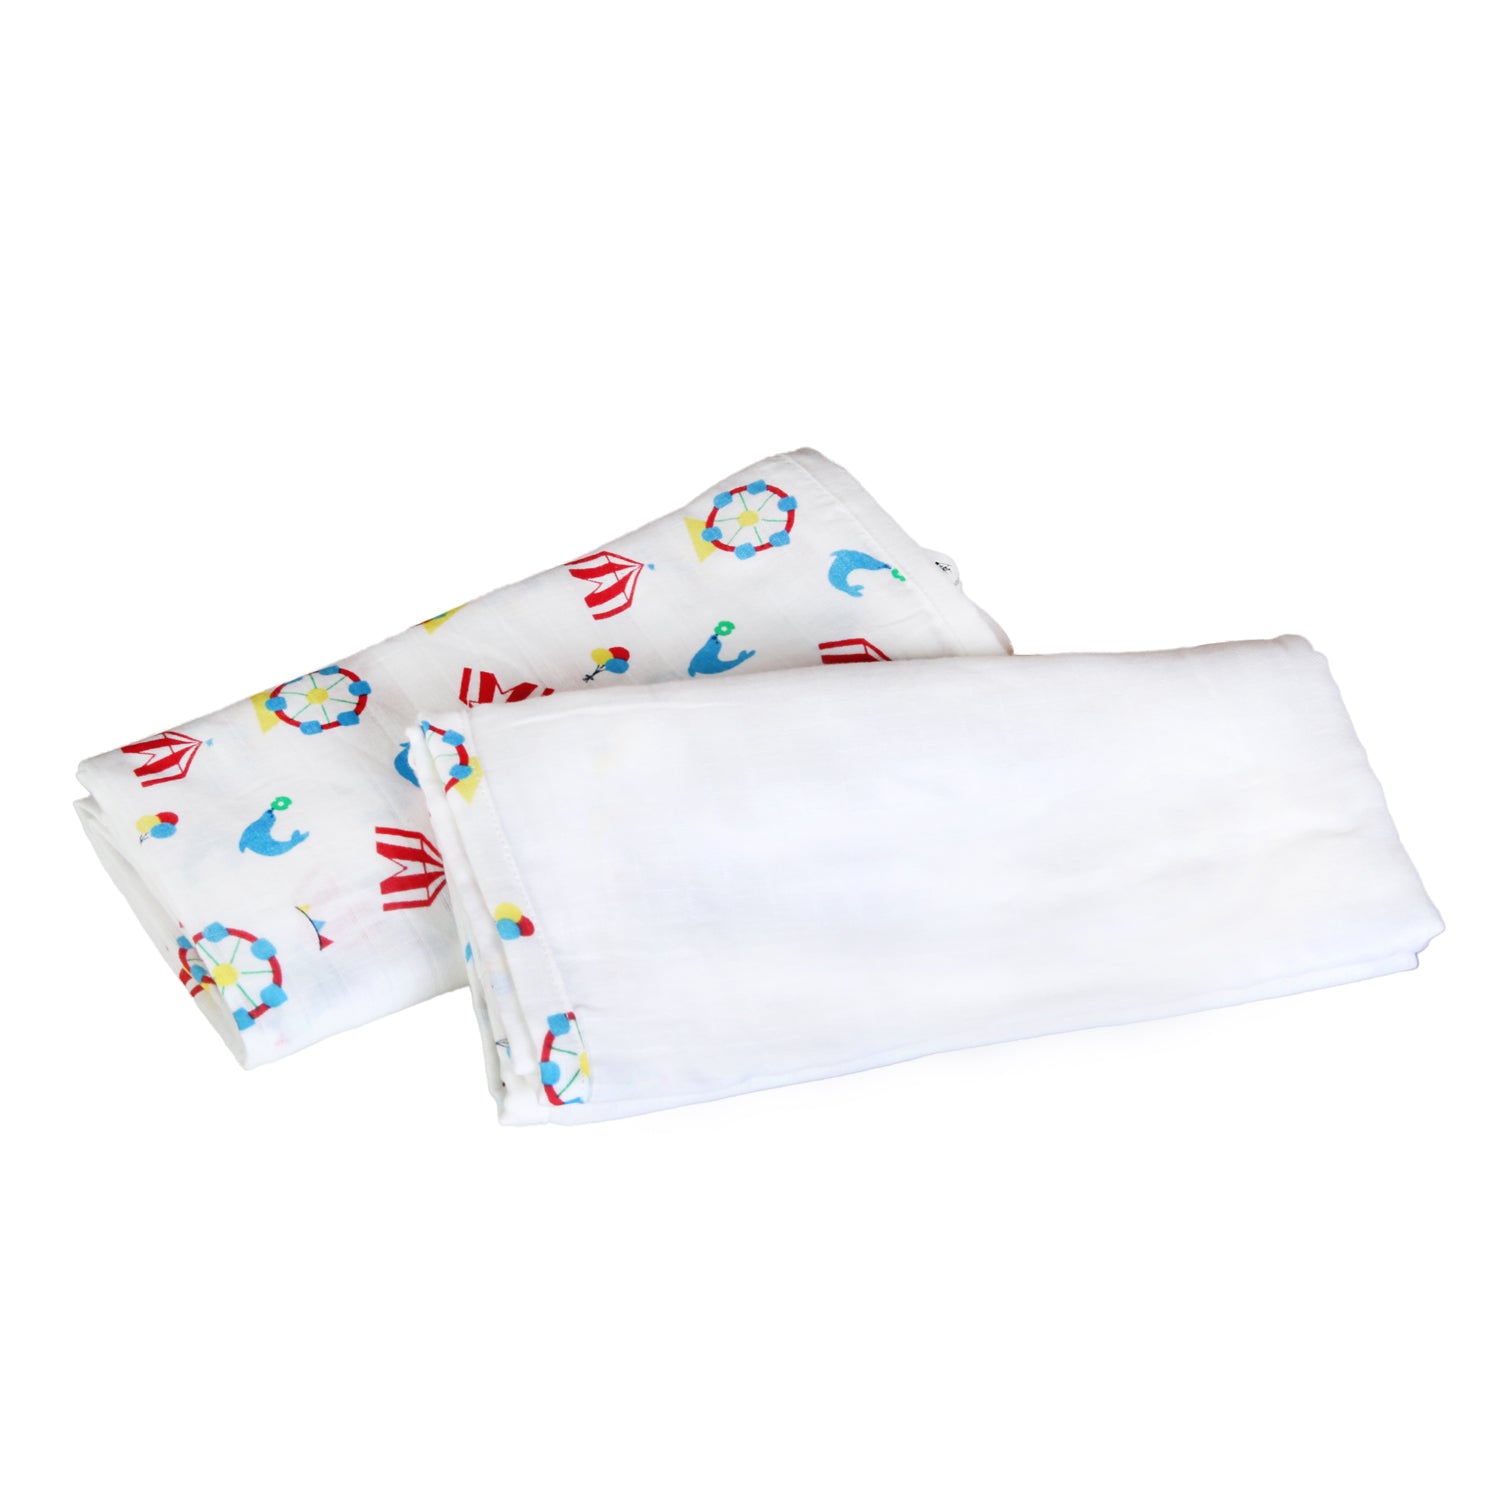 My Milestones 100% Cotton 3 In 1 Muslin Double Cloth (2 Layers) Baby Swaddle Wrapper - Pack Of 2 - Carnival T. Blue